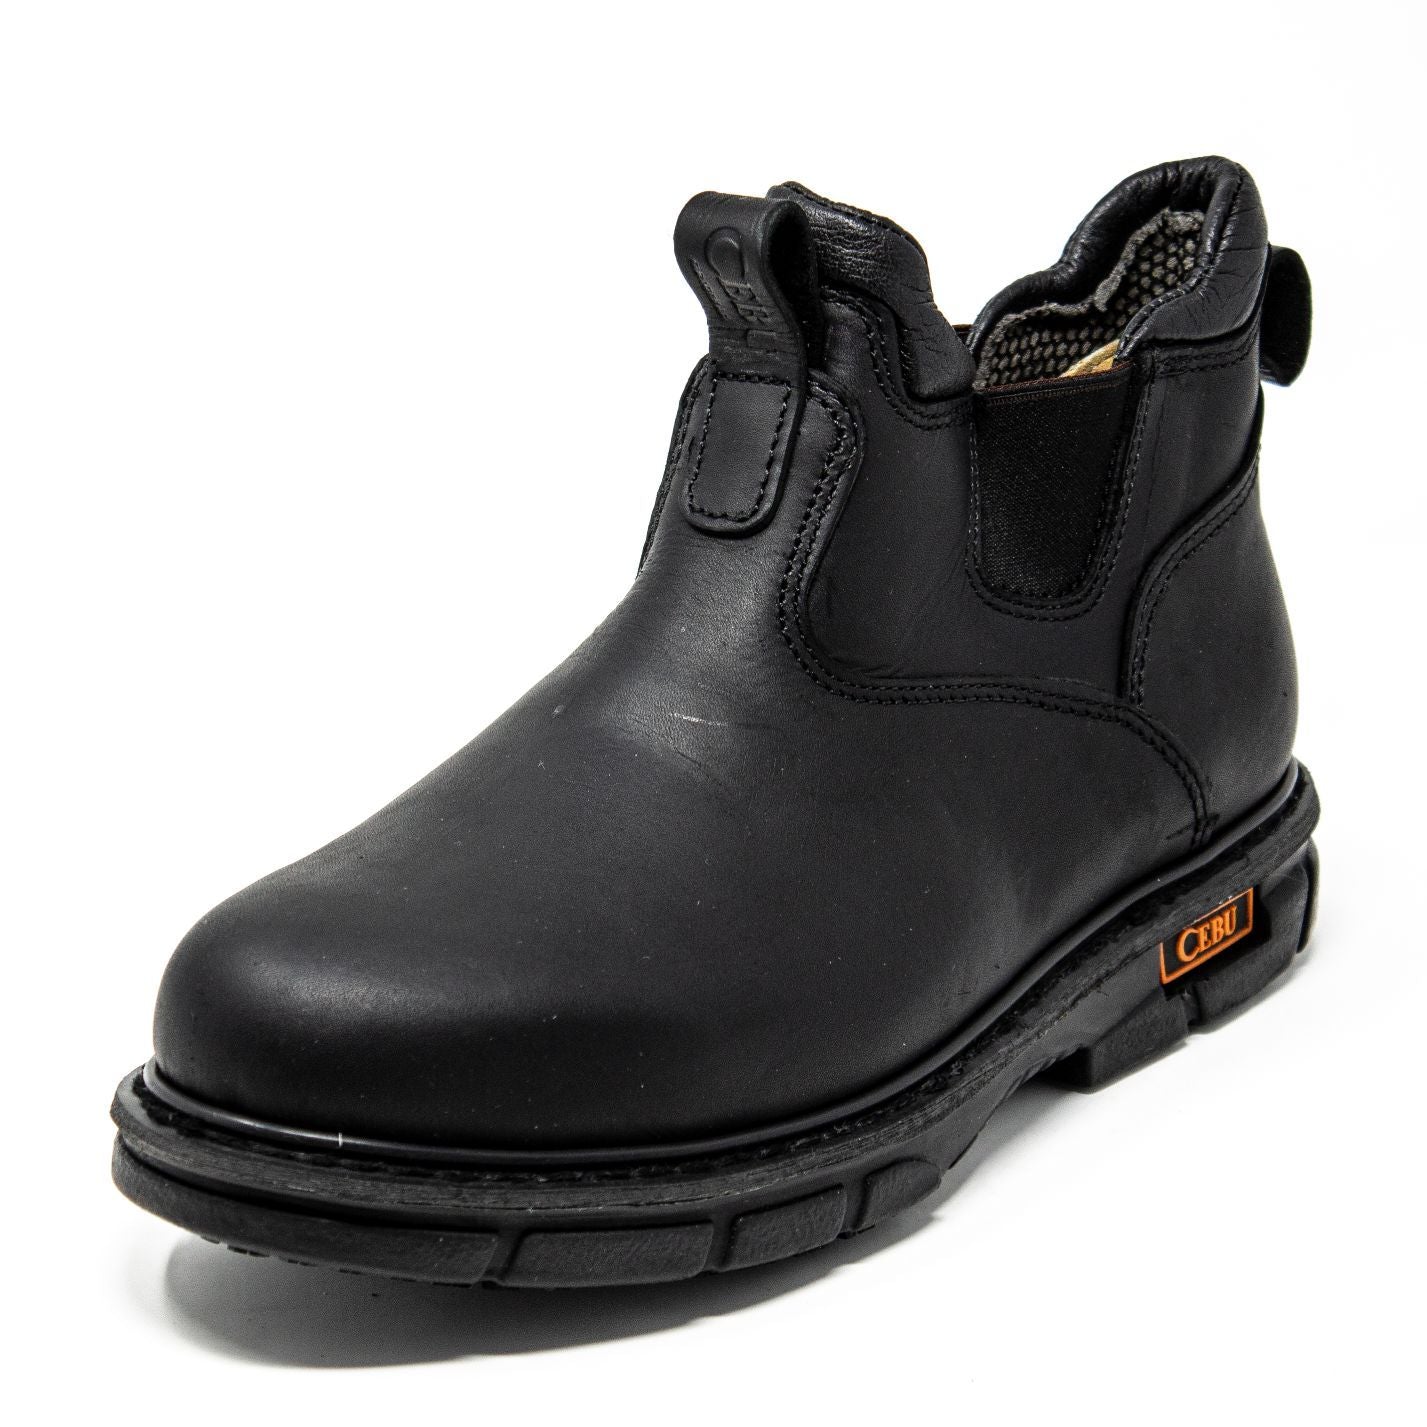 Men's Work Boots - Non Slip Ankle Work Boots - Slip On Work Boots - 6 ...